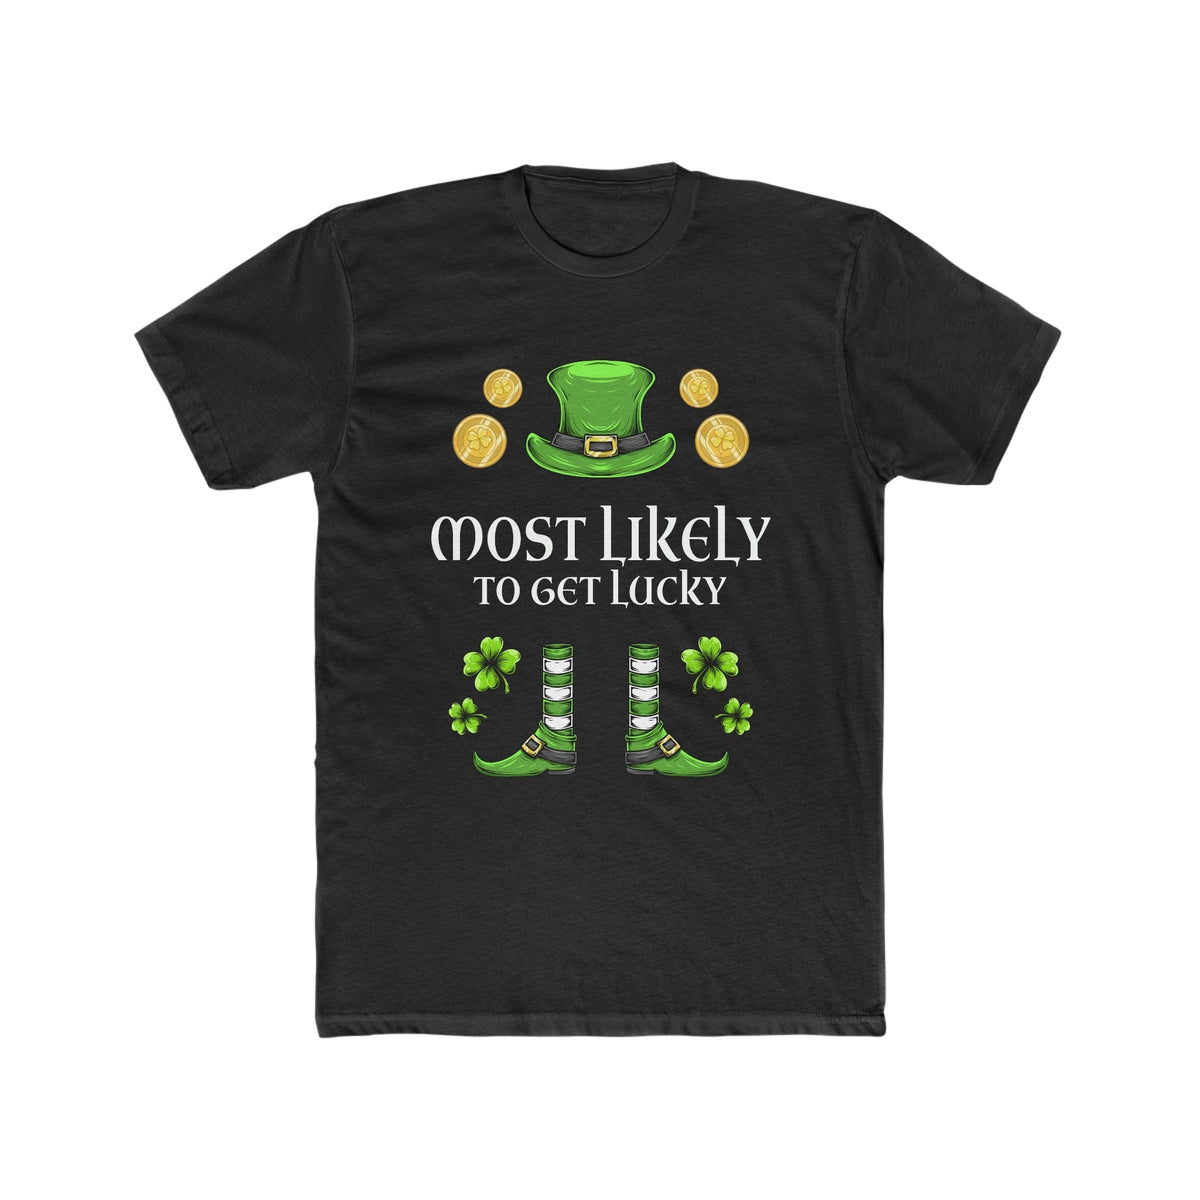 Most likely TO GET LUCKY Premium Unisex Shirt